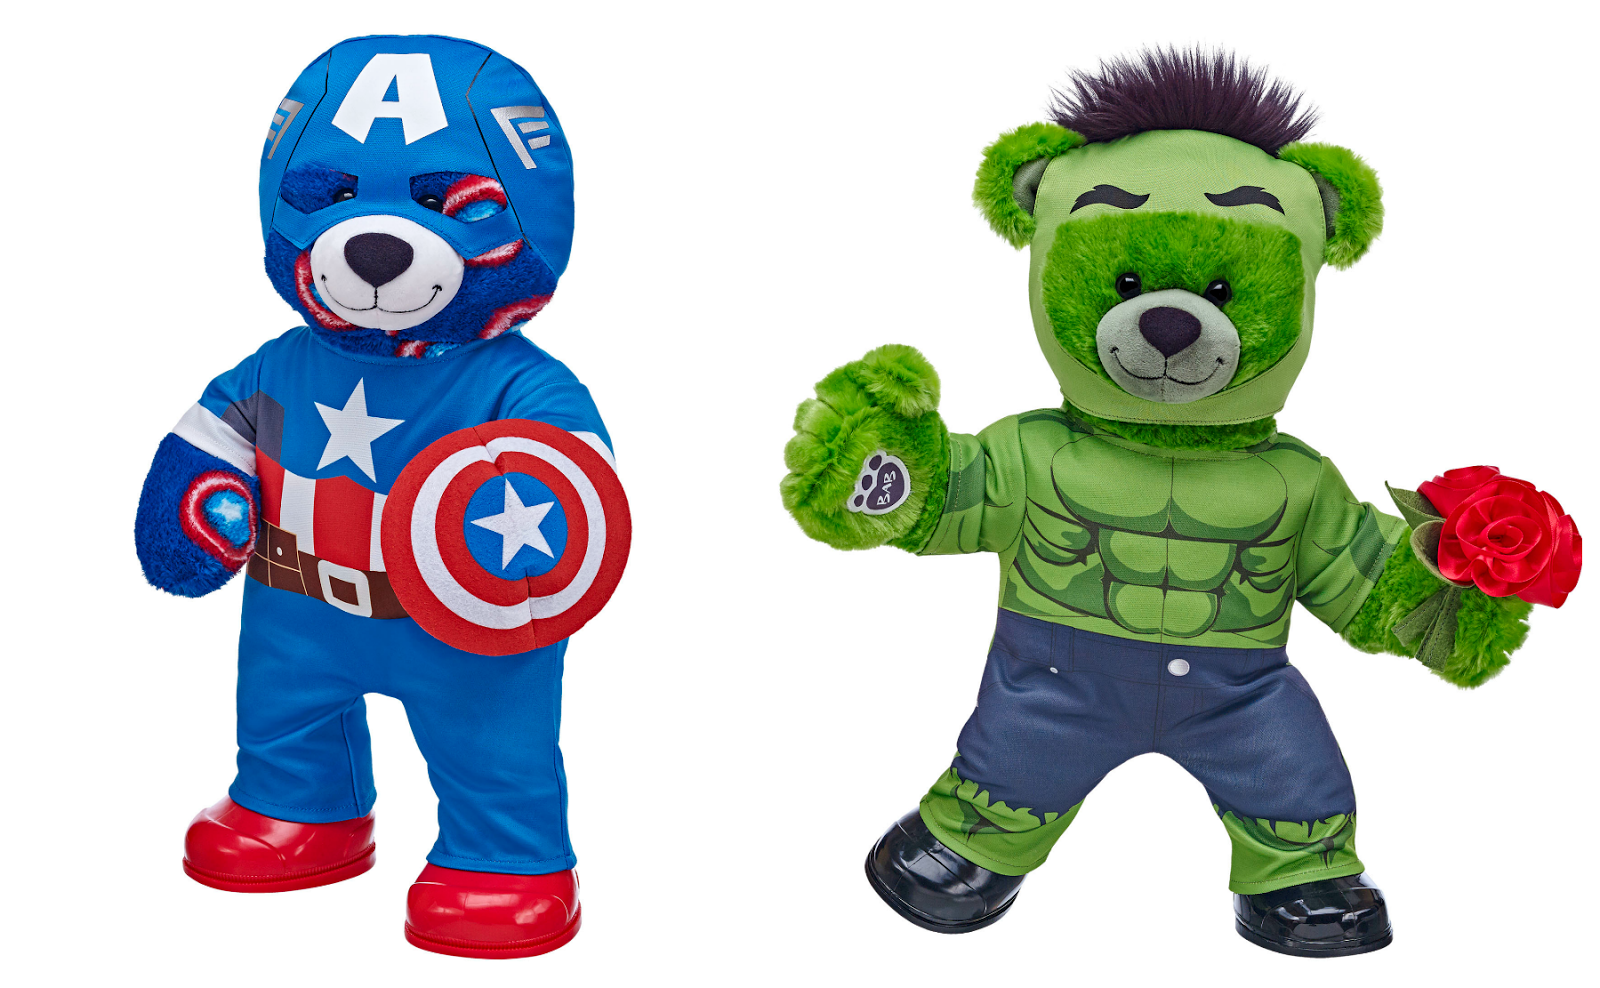 GIVEAWAY BuildABear Aligns with MakeAWish